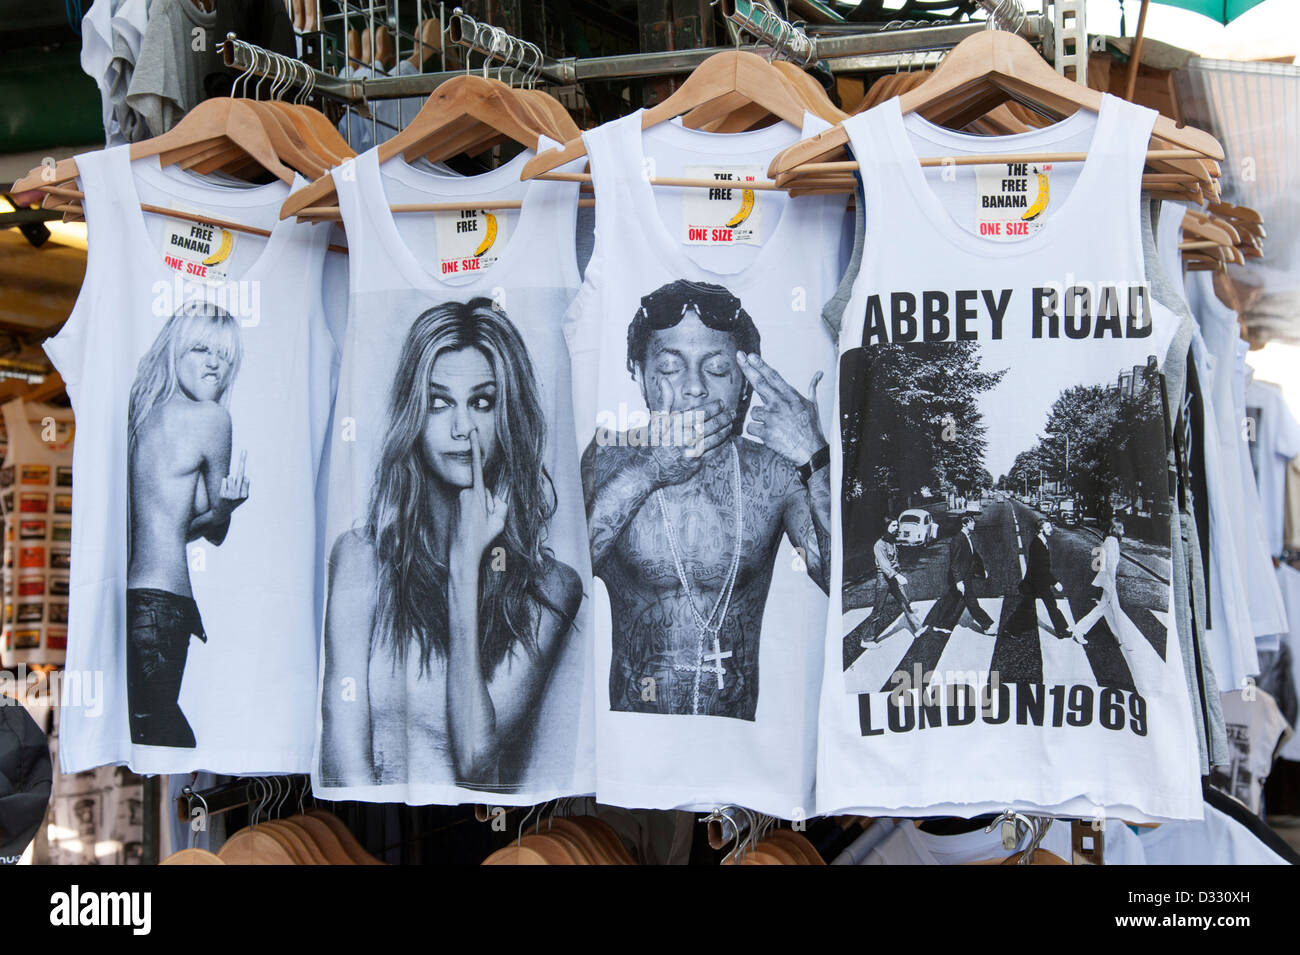 Trendy printed T shirts showing famous people for sale on Camden Market stall, London, England, UK Stock Photo